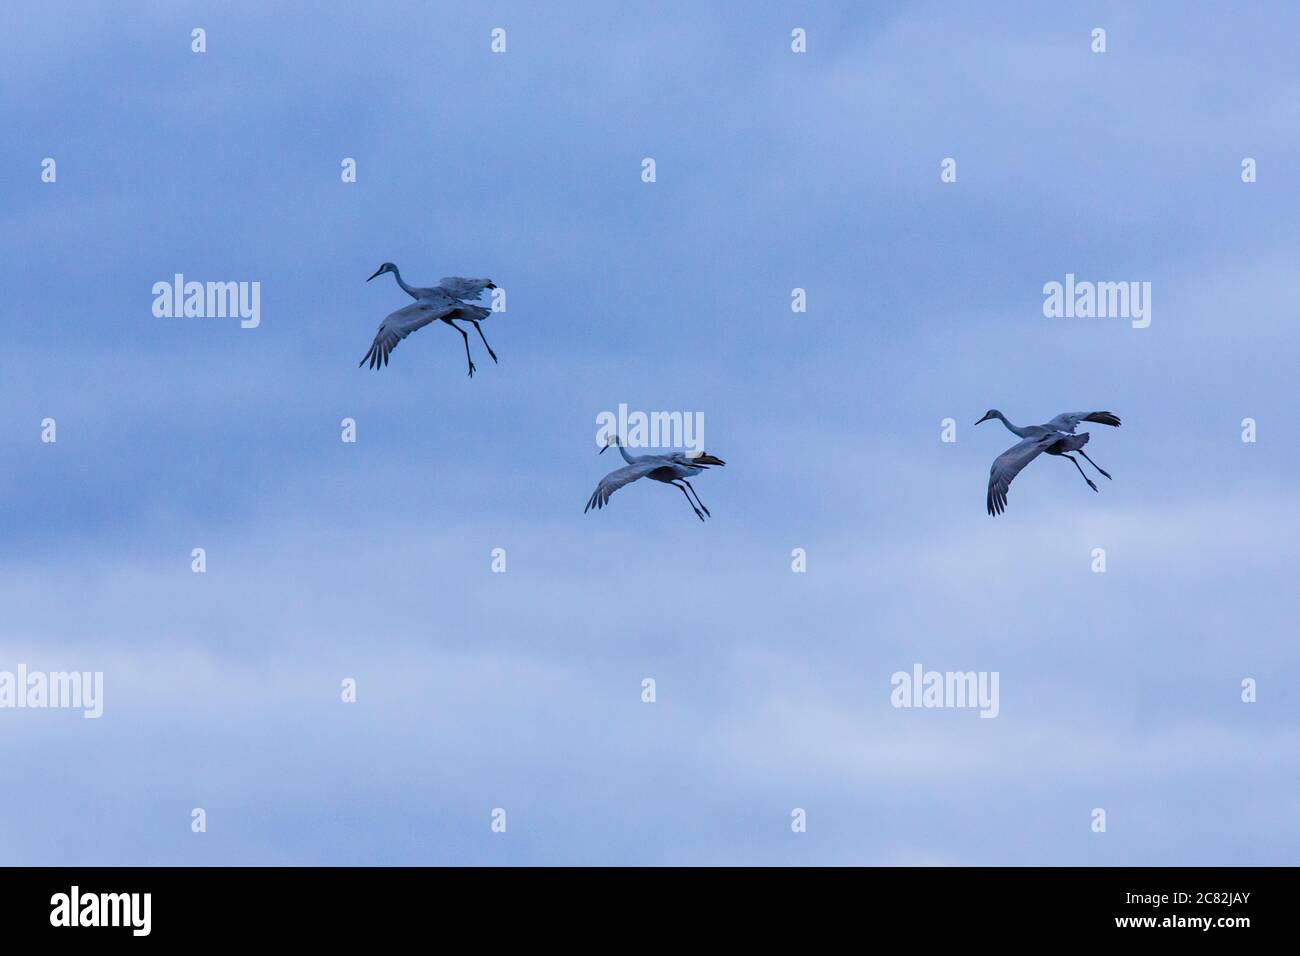 Three Sandhill Cranes, Antigone canadensis, drop in for a landing in their very characteristic 'sitting' position with a 'gear down, flaps down' confi Stock Photo